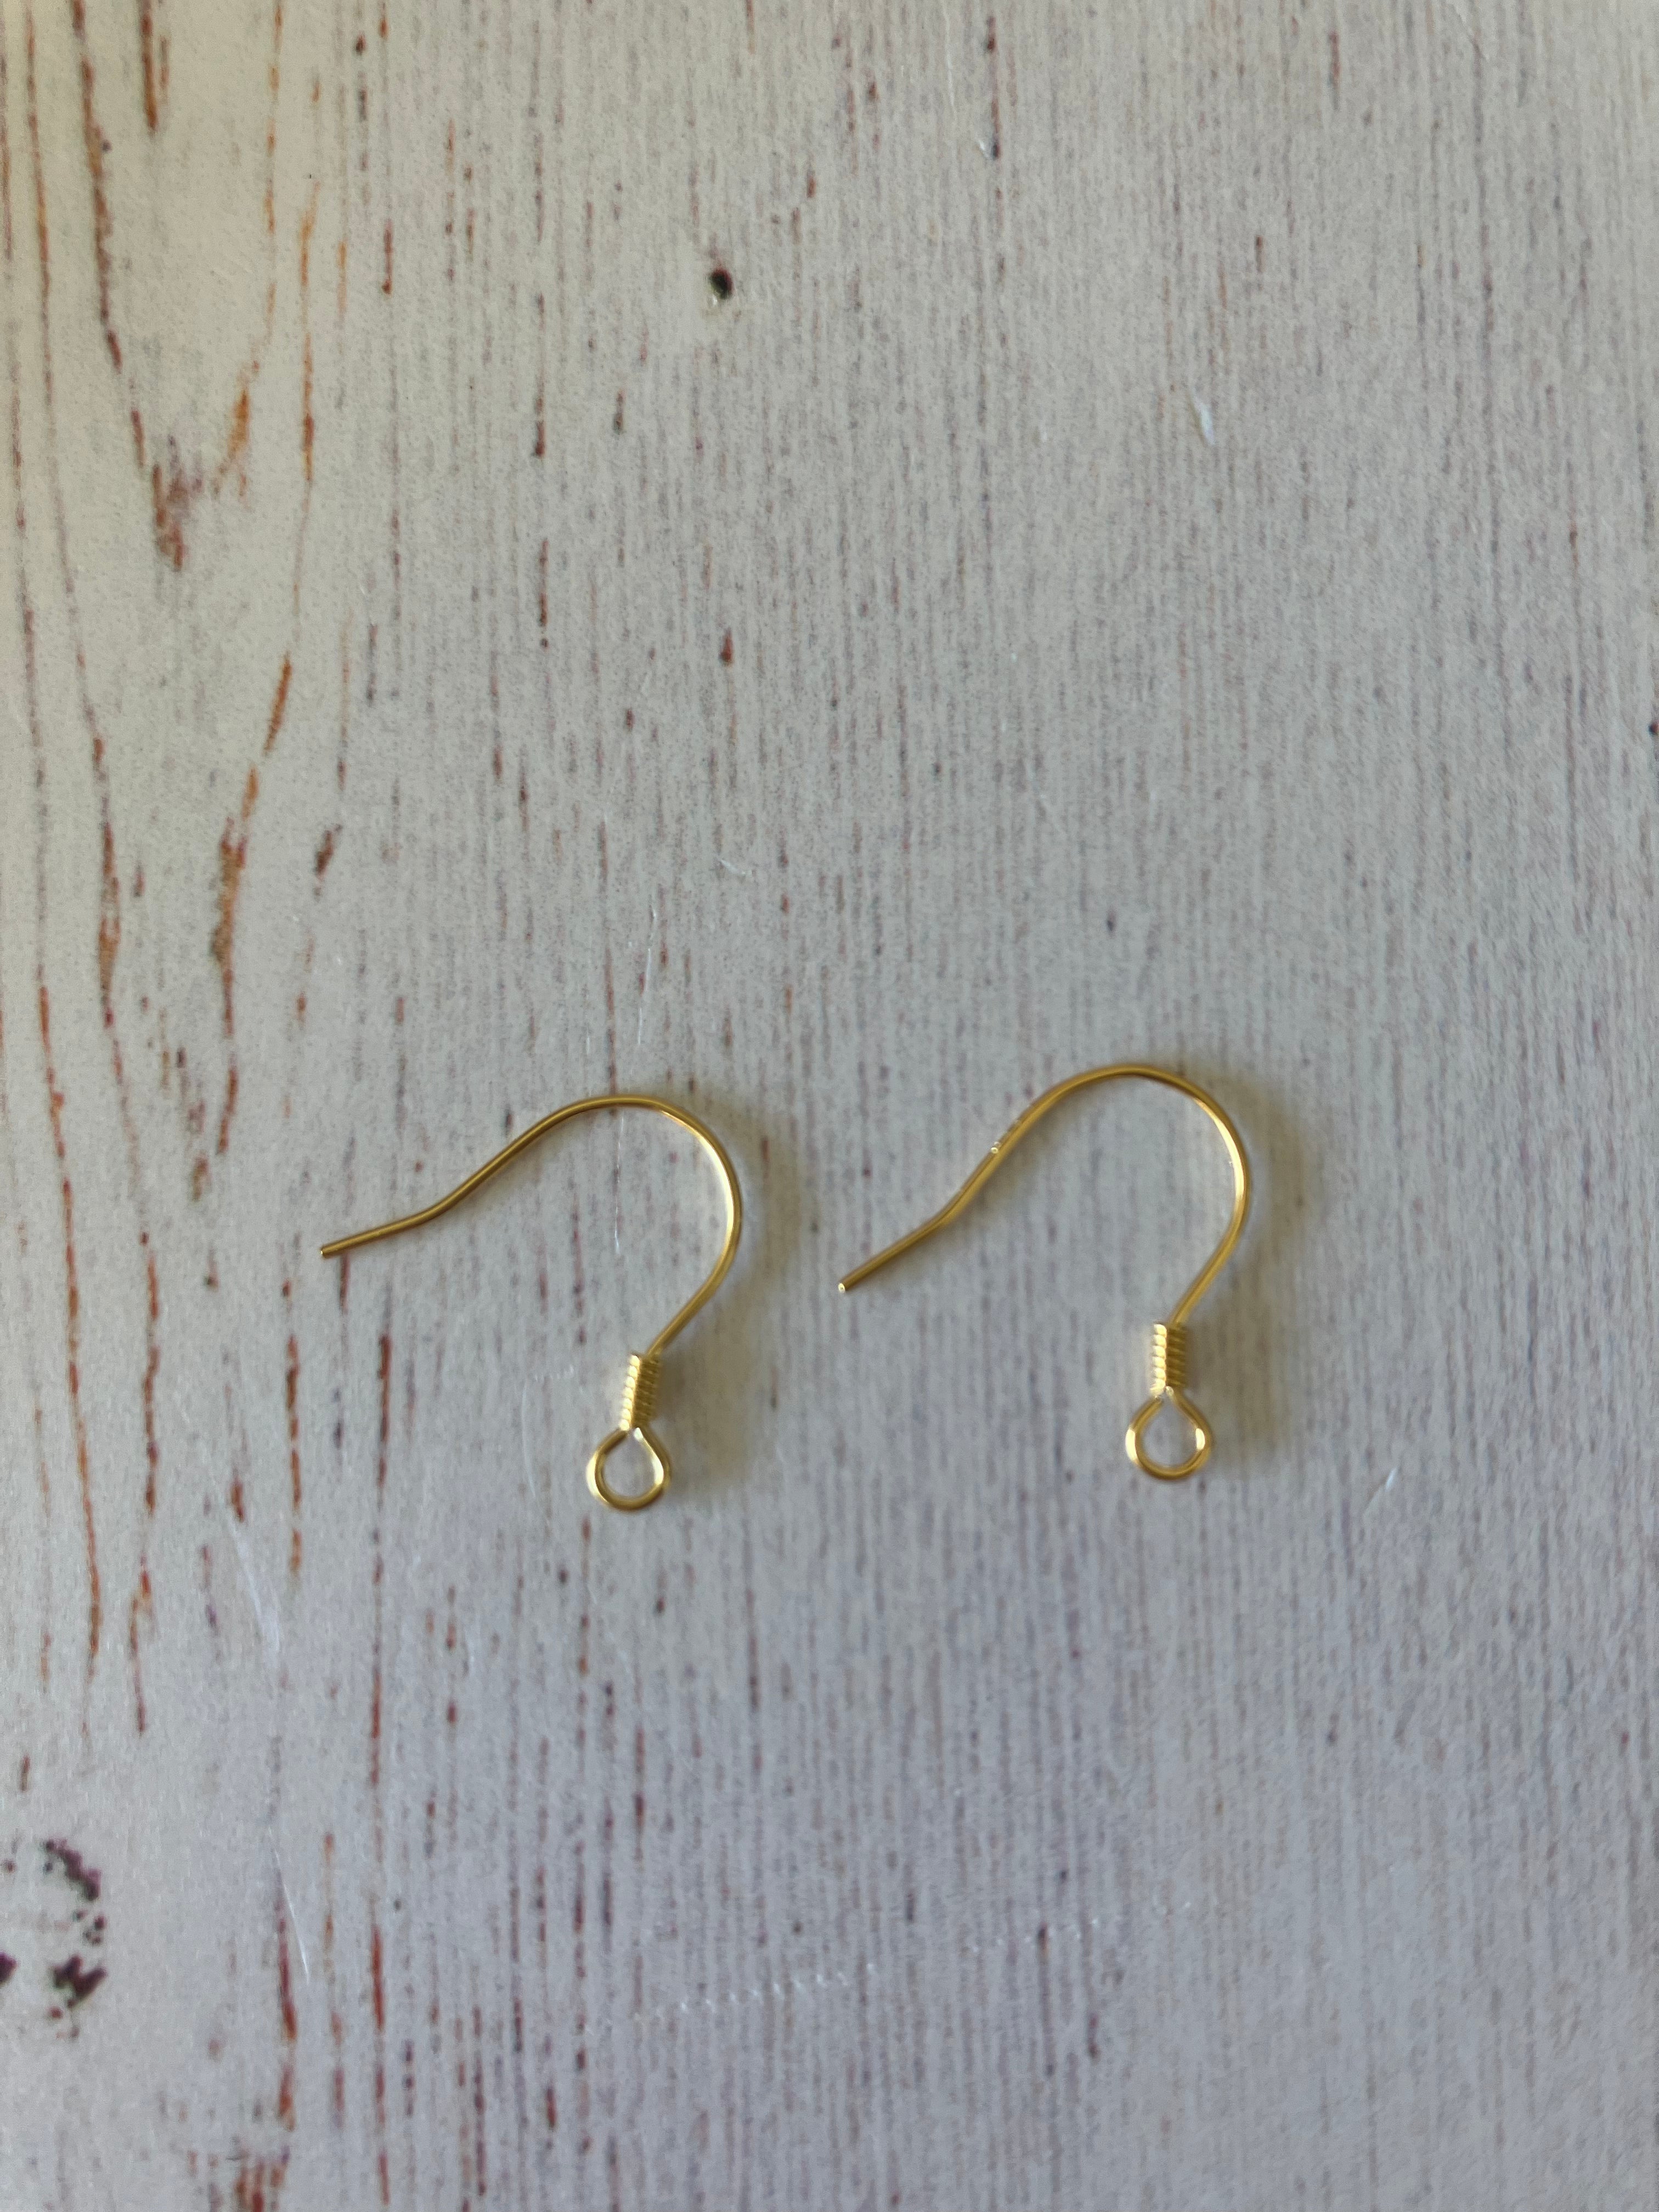 925 Sterling Silver Earring Hooks, with Horizontal Loops, Golden (Dainty Hooks) (1 Pair)